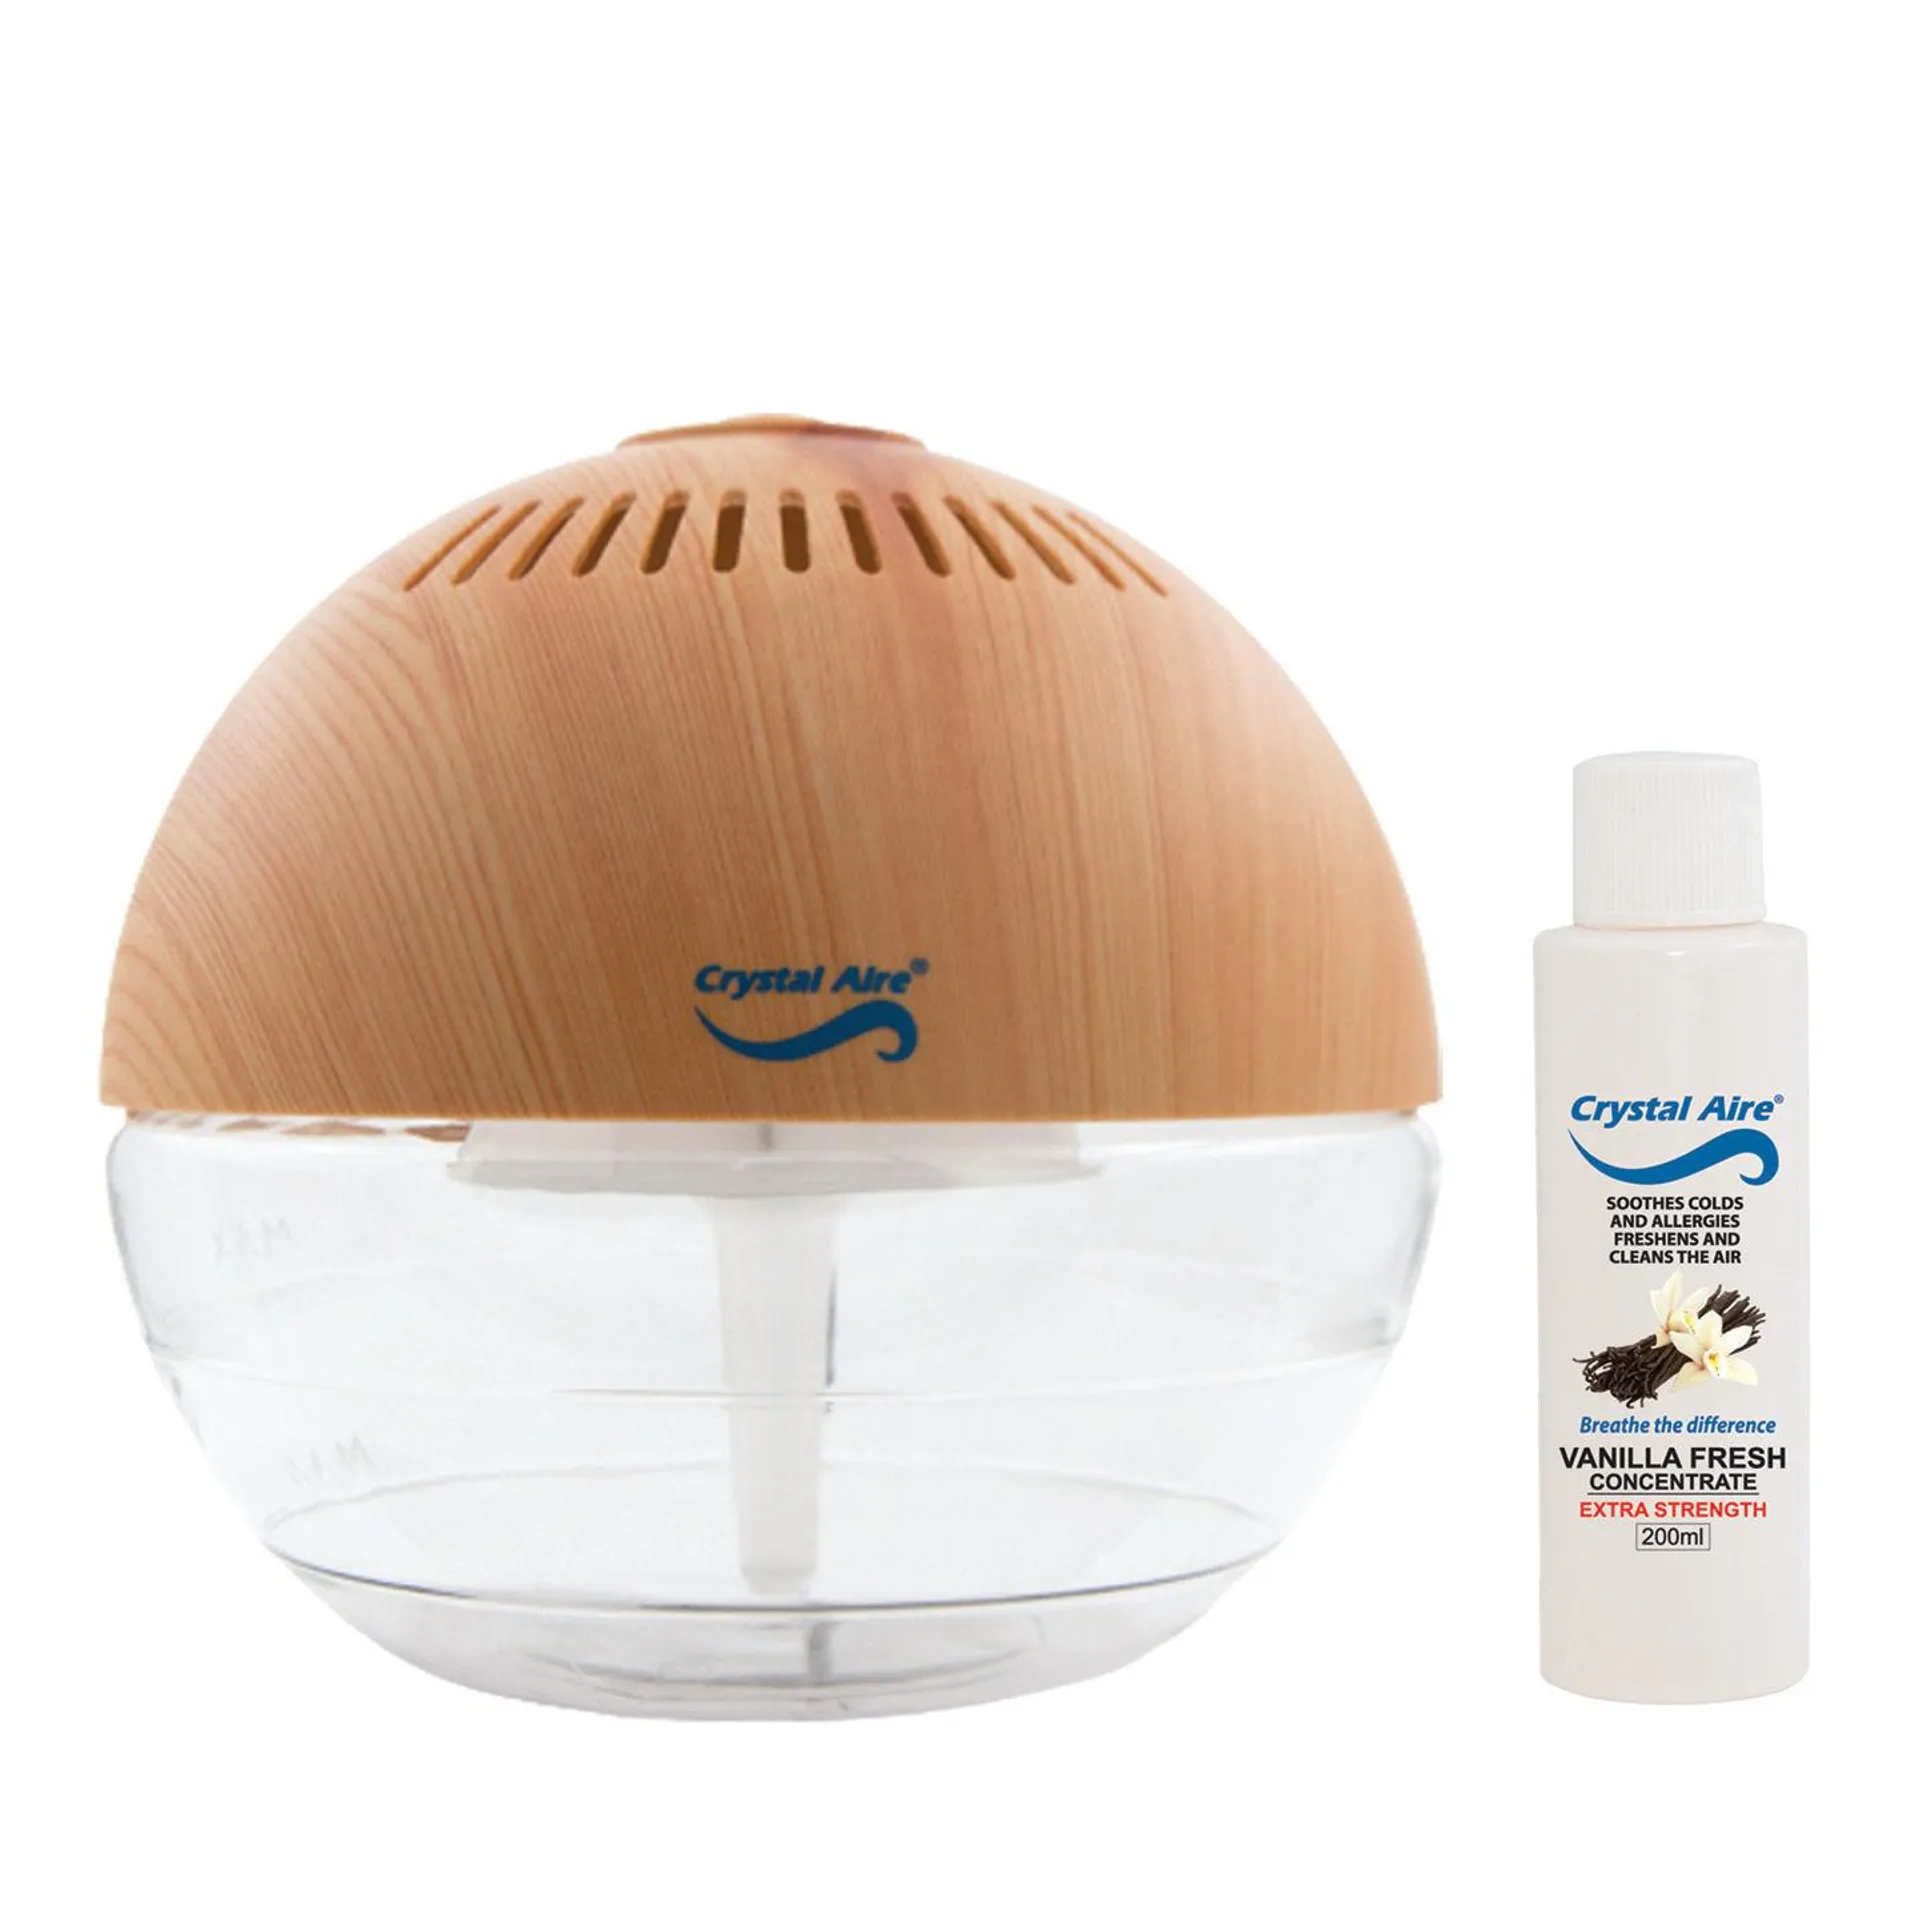 Crystal Aire LED Globe Air Purifier with 200ml Vanilla concentrate